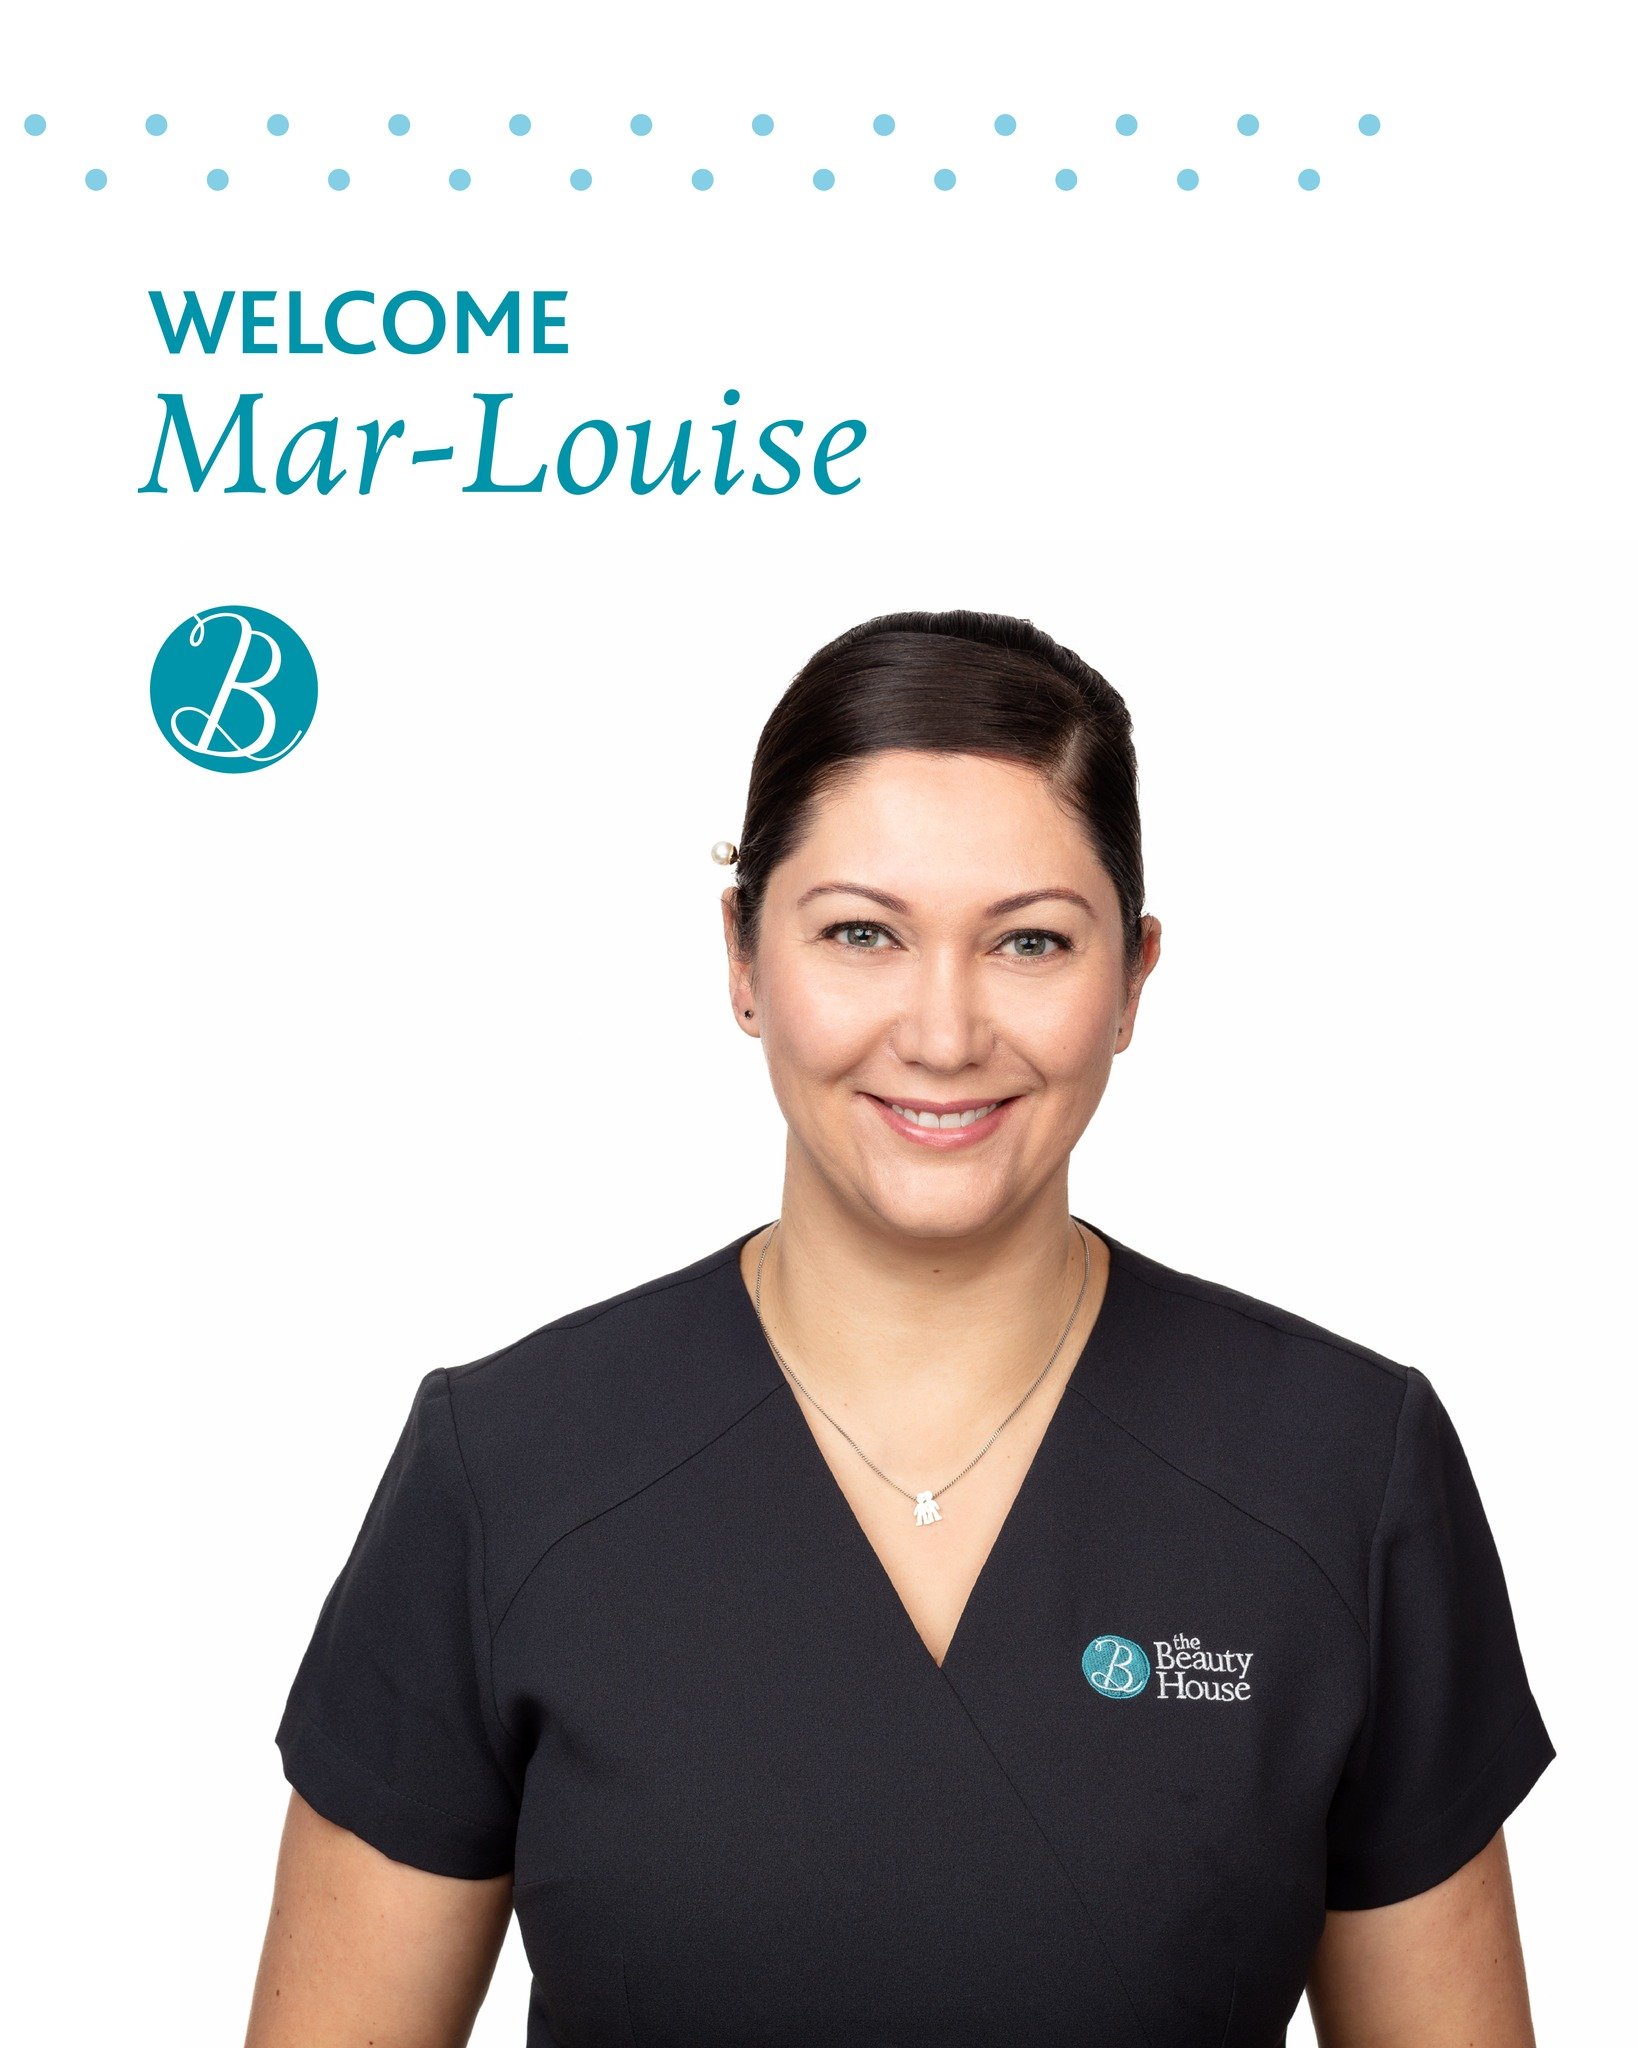 We welcome Mar-Louise to The Beauty House. 

We are currently offering 20% off on Lumafirm Body Treatments with Mar-Louise. 

To book online, visit
&gt;&gt; Link in bio

 #20beautifulyears #beautysalon #jerseyci